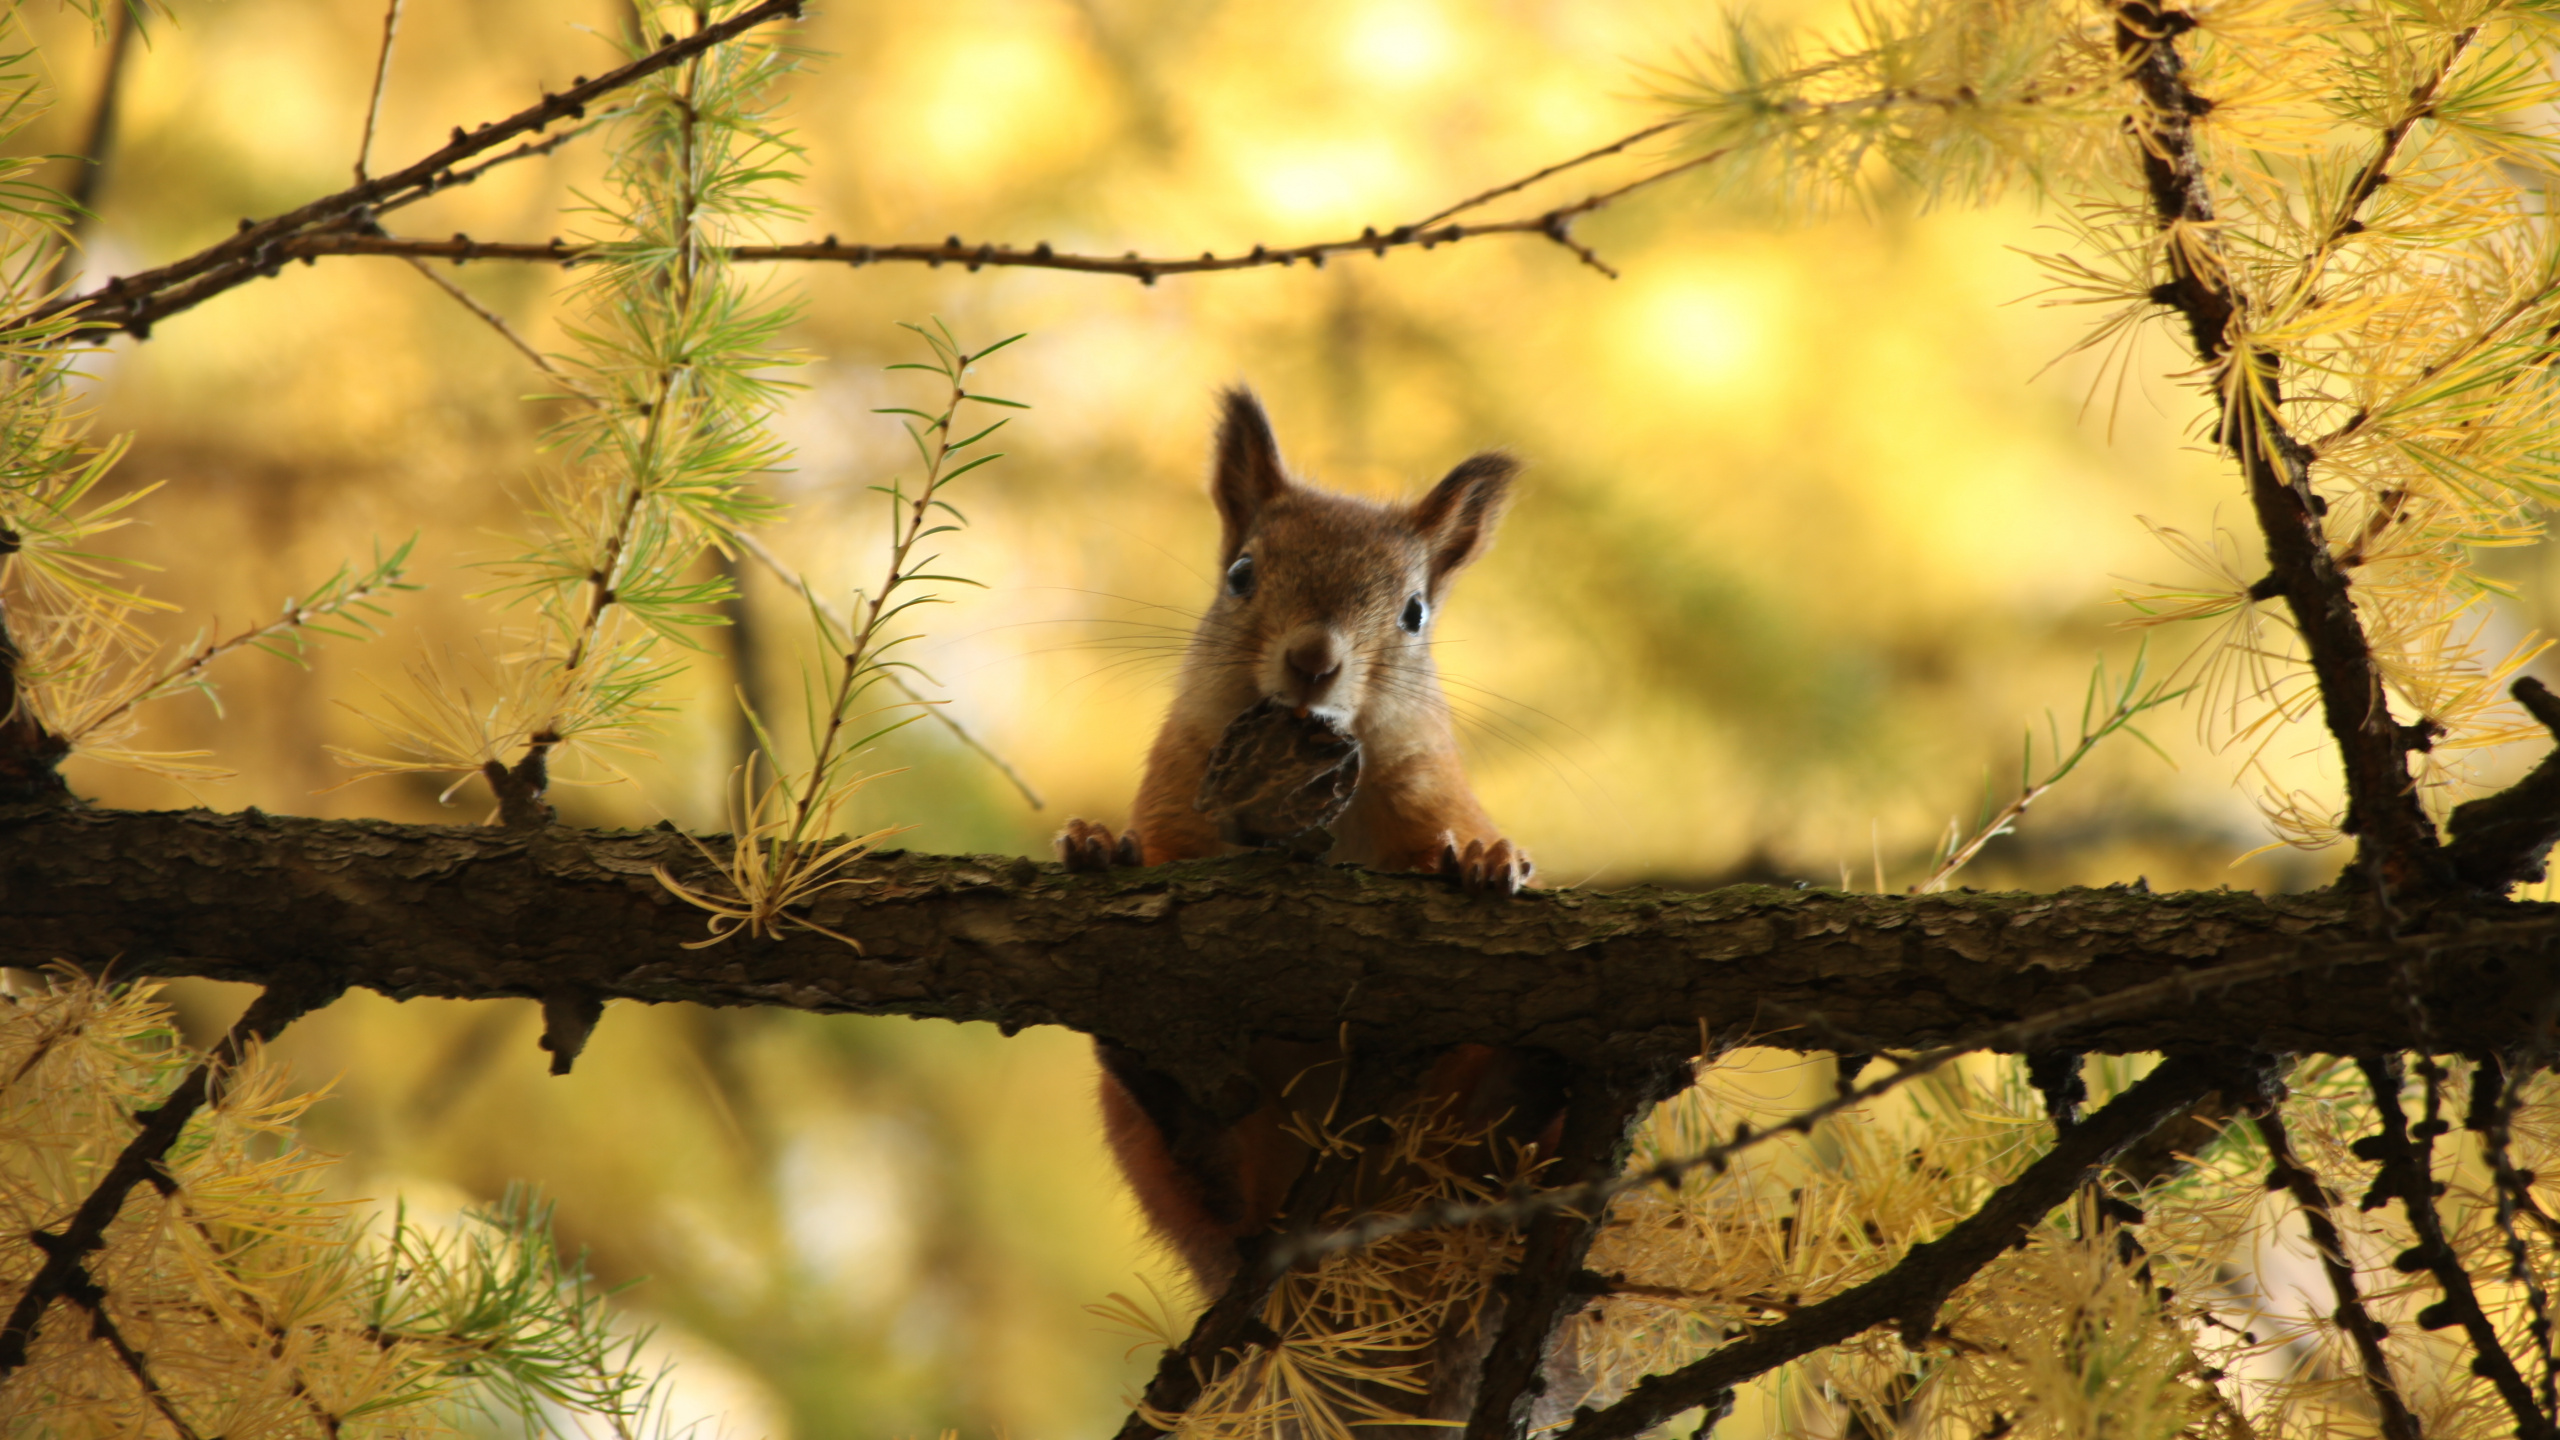 Brown Fox on Brown Tree Branch During Daytime. Wallpaper in 2560x1440 Resolution